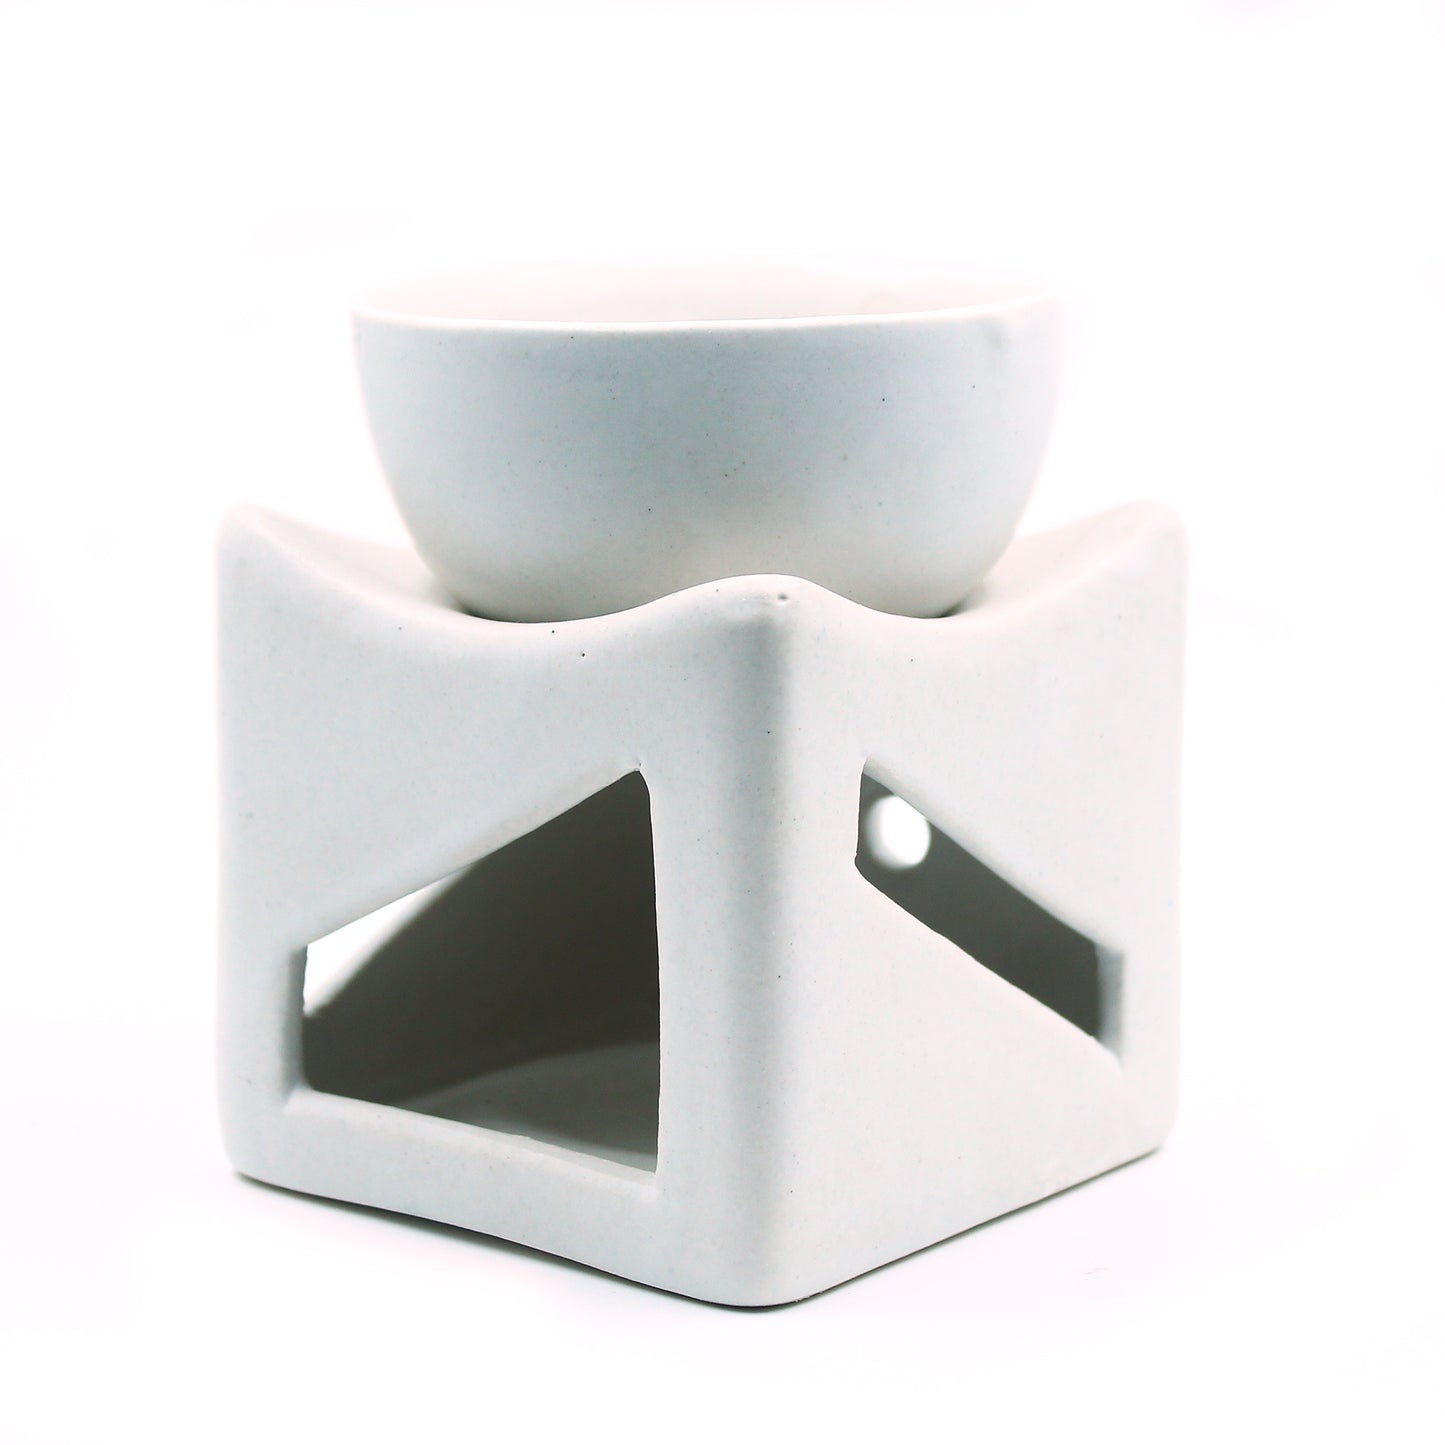 Lamp-Square Shape Ceramic Candle Diffuser for Aromatherapy Oil Warmer Perfume Aroma Lamp